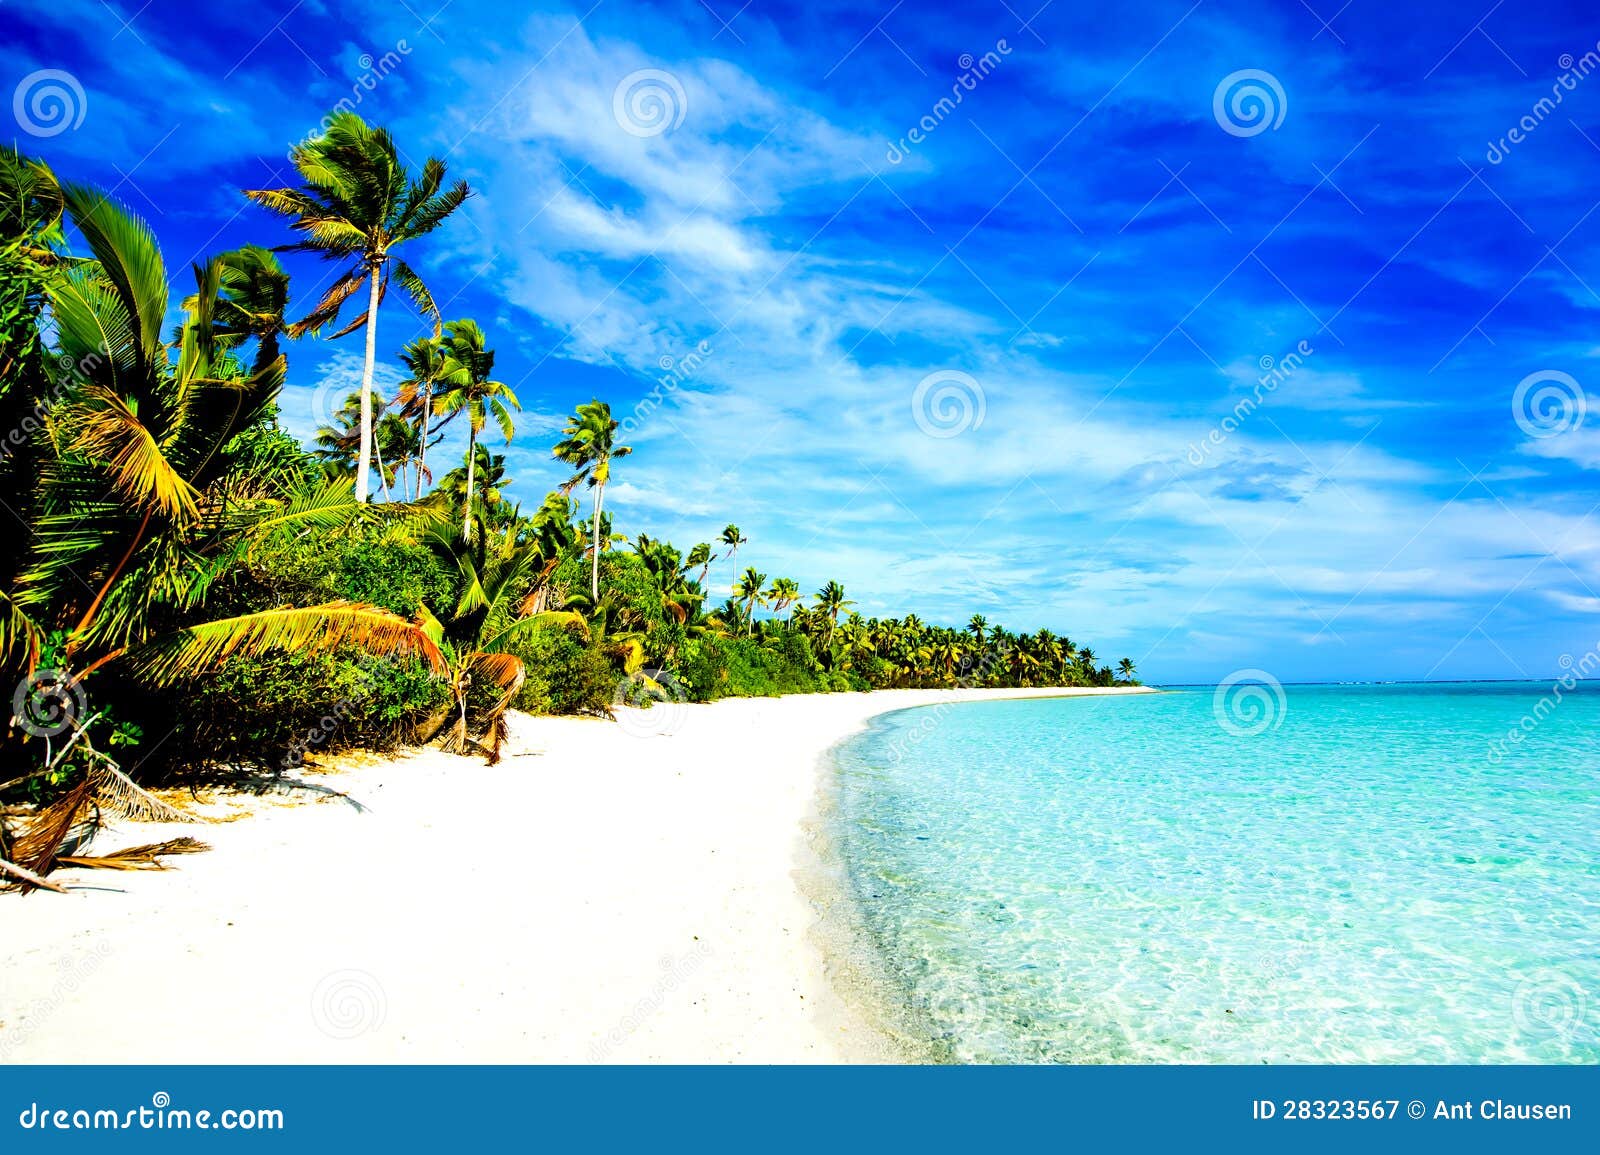 Beautiful Tropical Beach with palm trees and clear blue water.